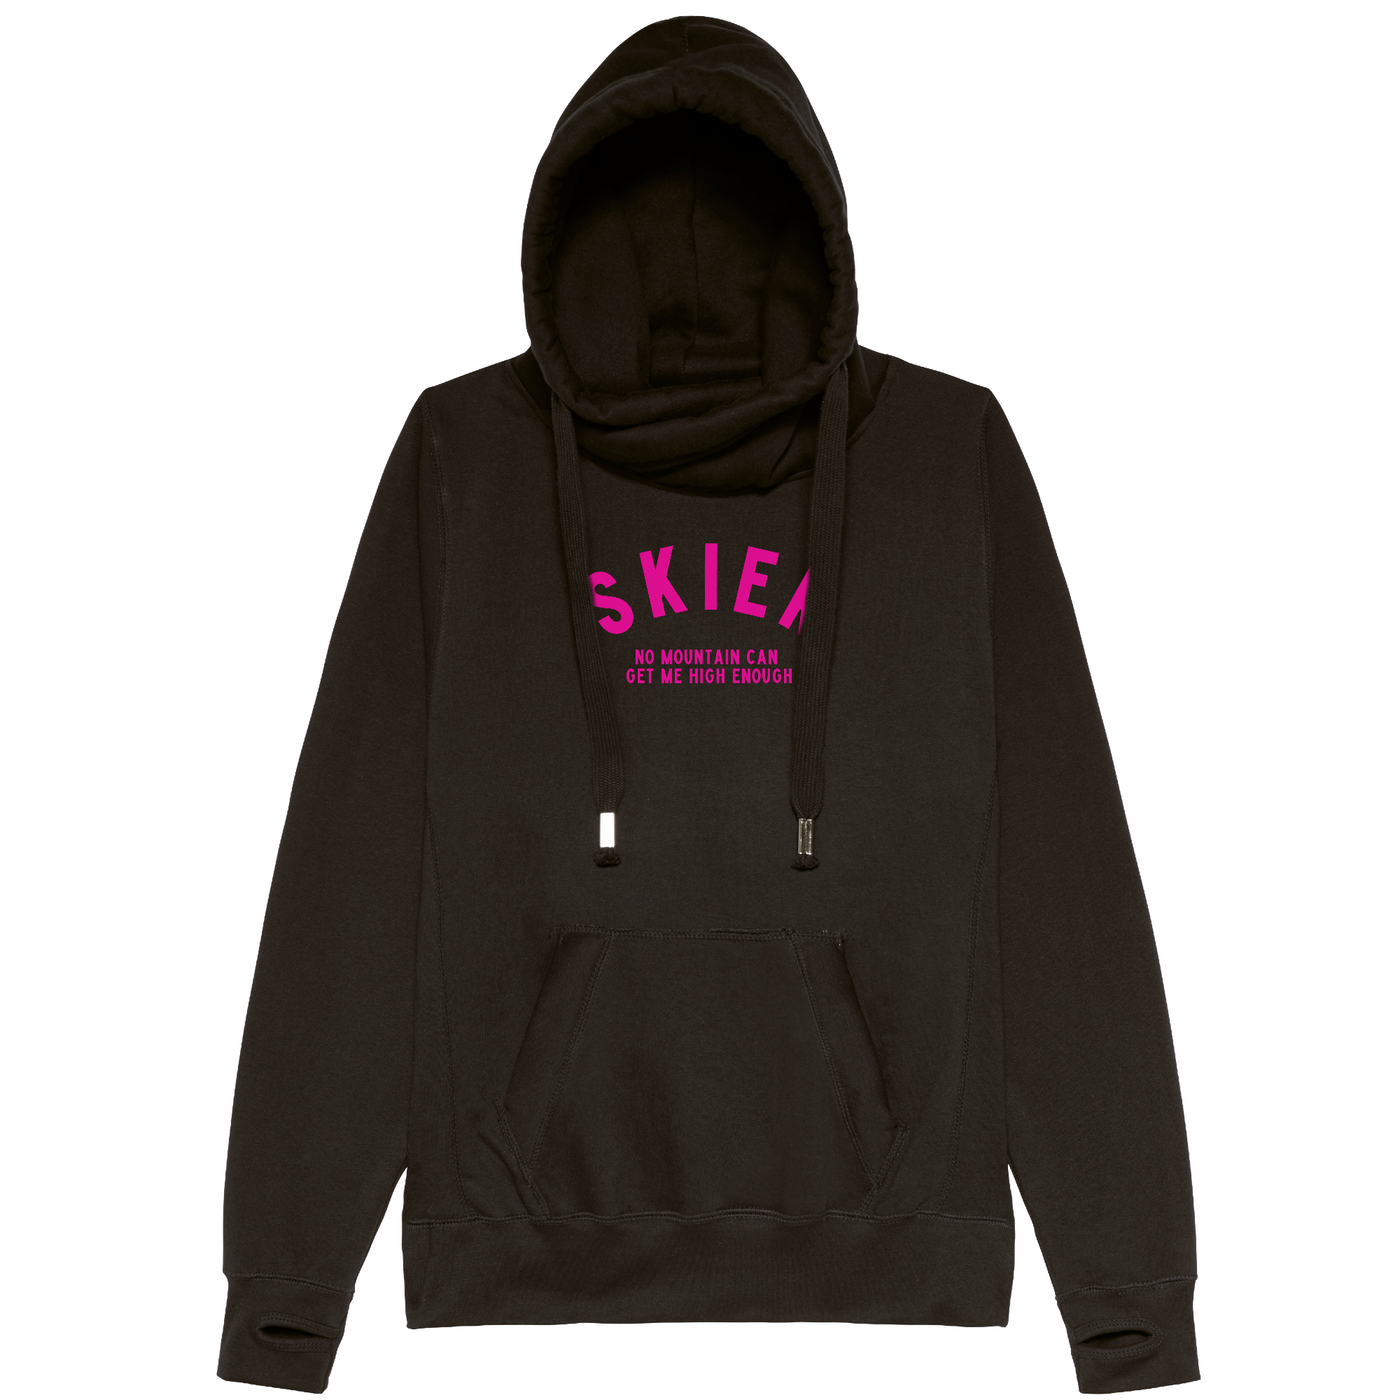 SALE - Skier's Hoodie - The Definition - Small